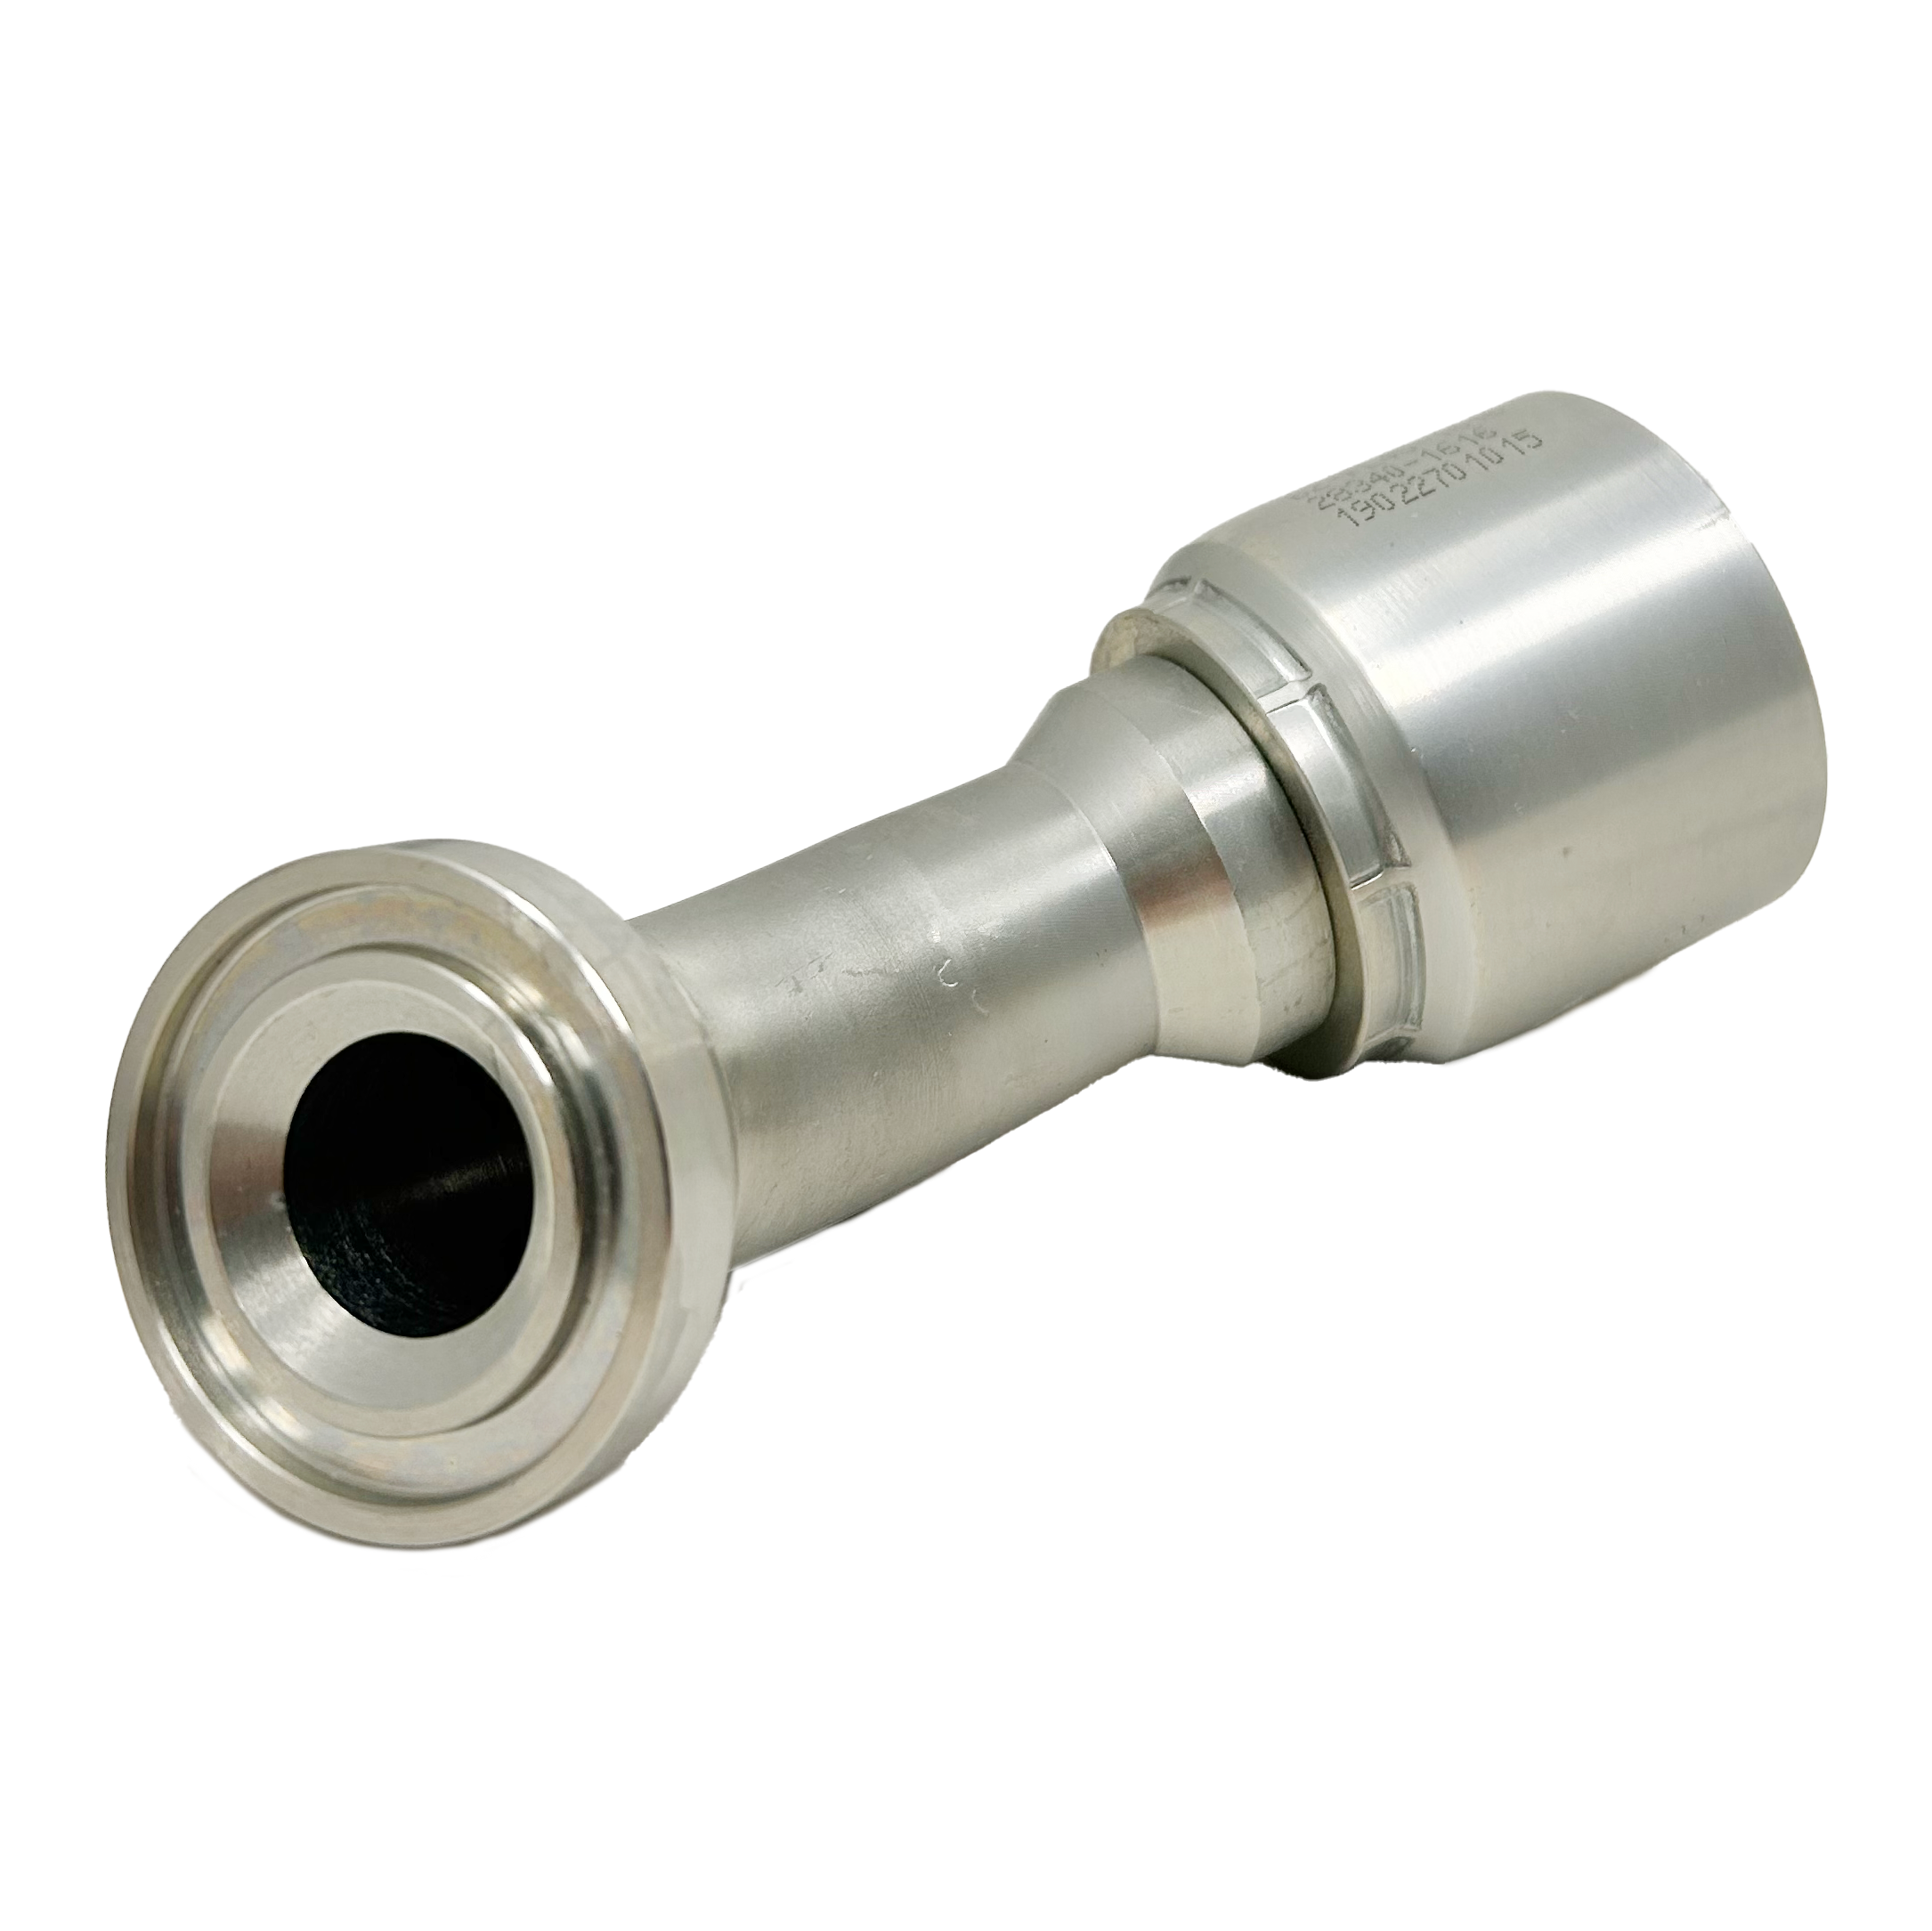 B2-FL45-3232S: Continental Hose Fitting, 2" Hose ID x 2" Code 61, 45-Degree Connection